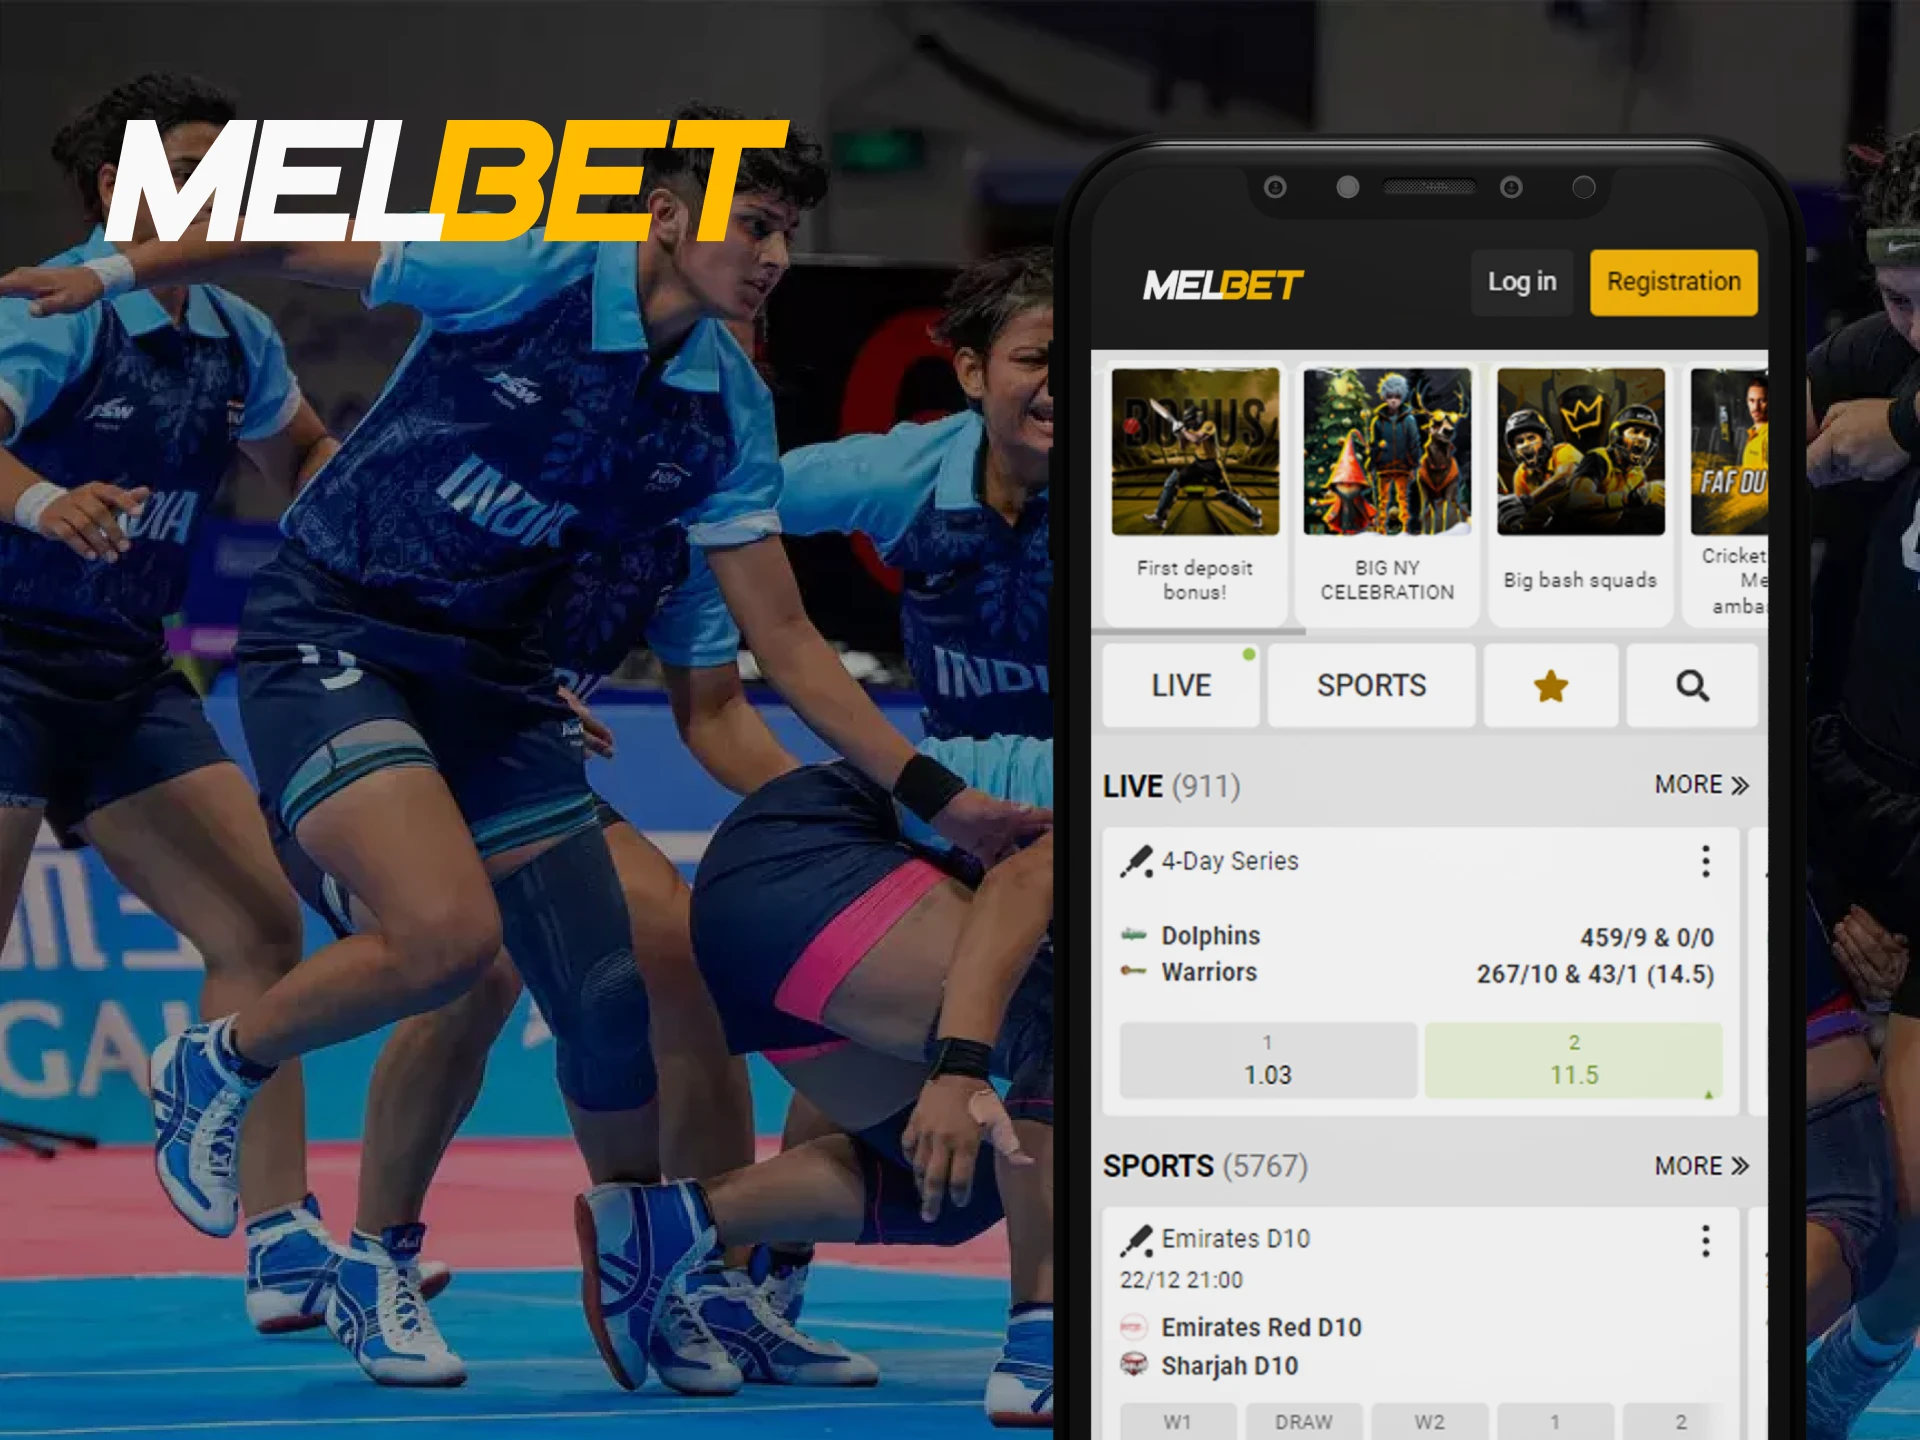 Place bets on sports from your device using the Melbet app.